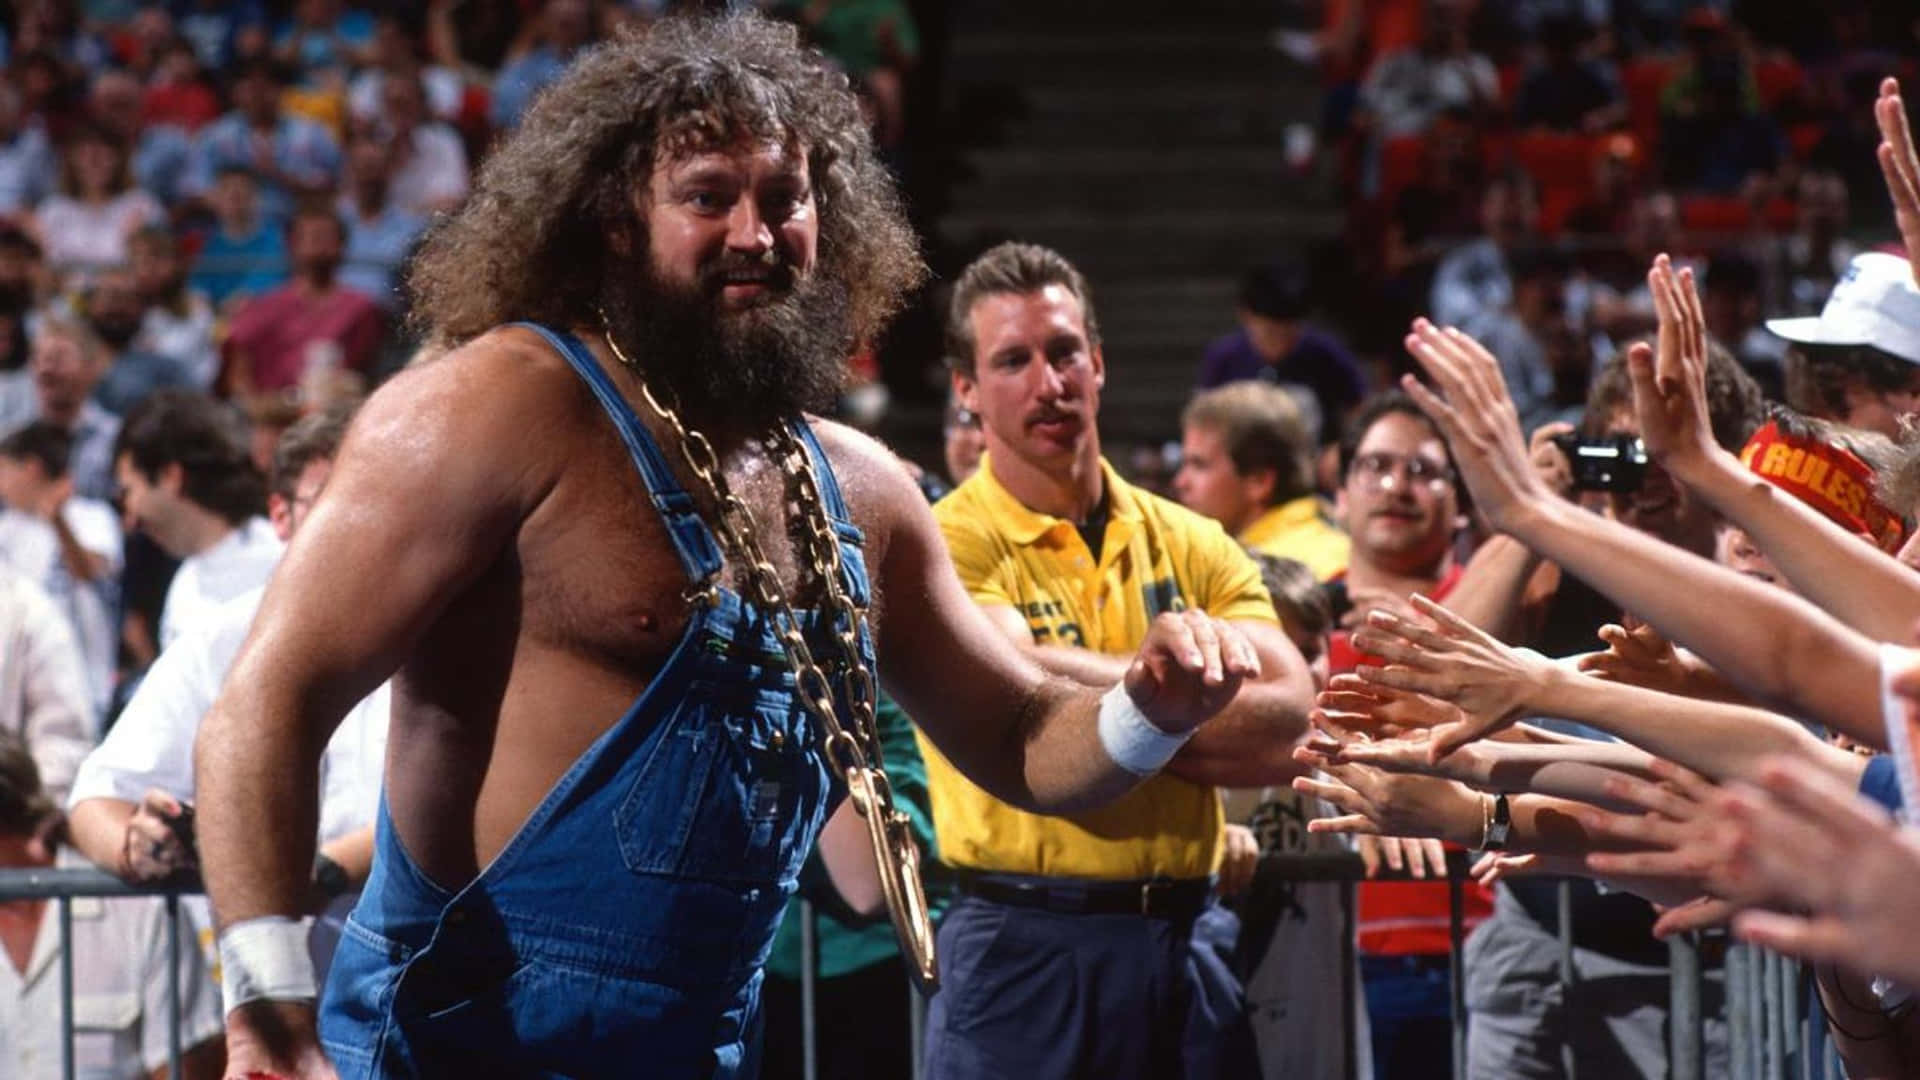 Hillbilly Jim With The Fans Wallpaper